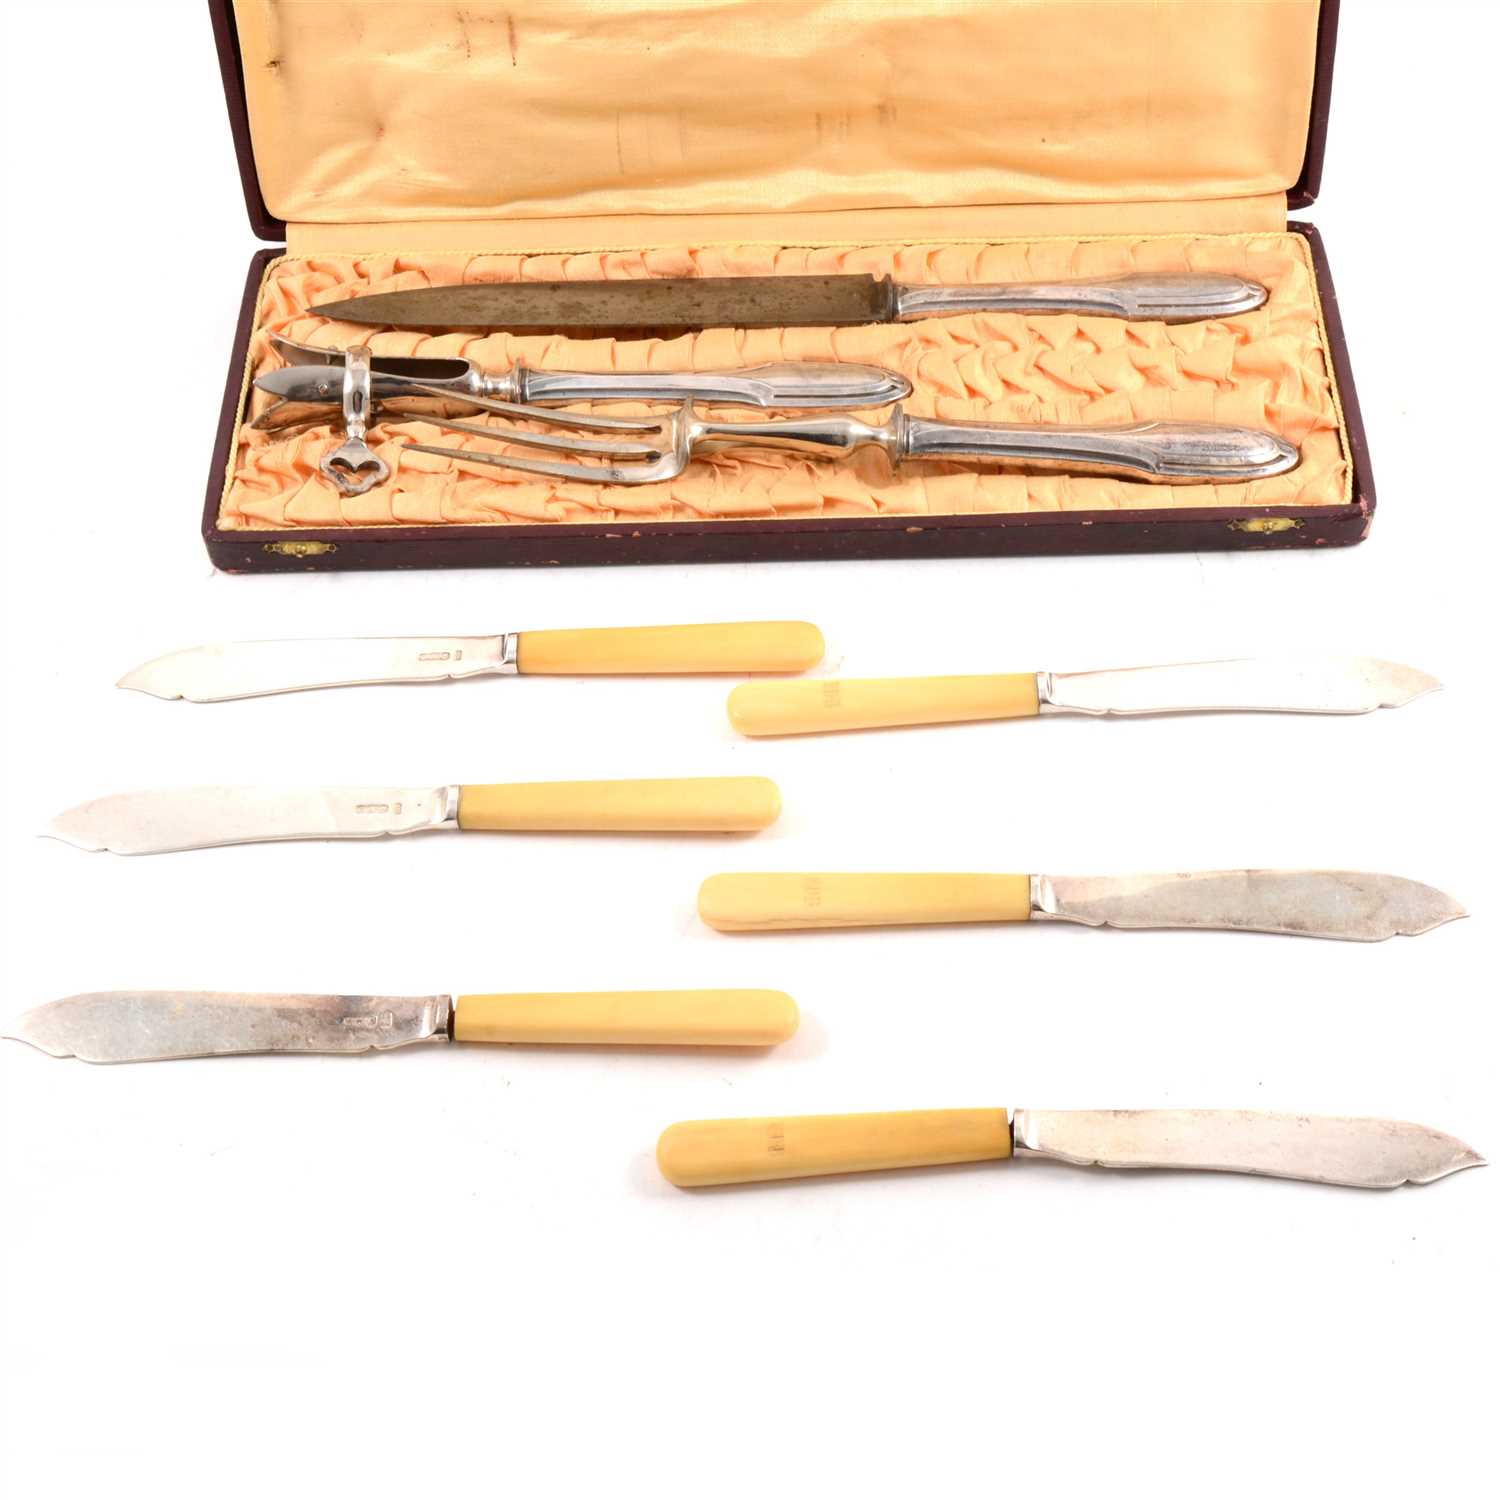 Lot 182 - A set of twelve silver fish knives and forks by Mappin & Webb Ltd, plus a cased French silver-handled three piece carving set